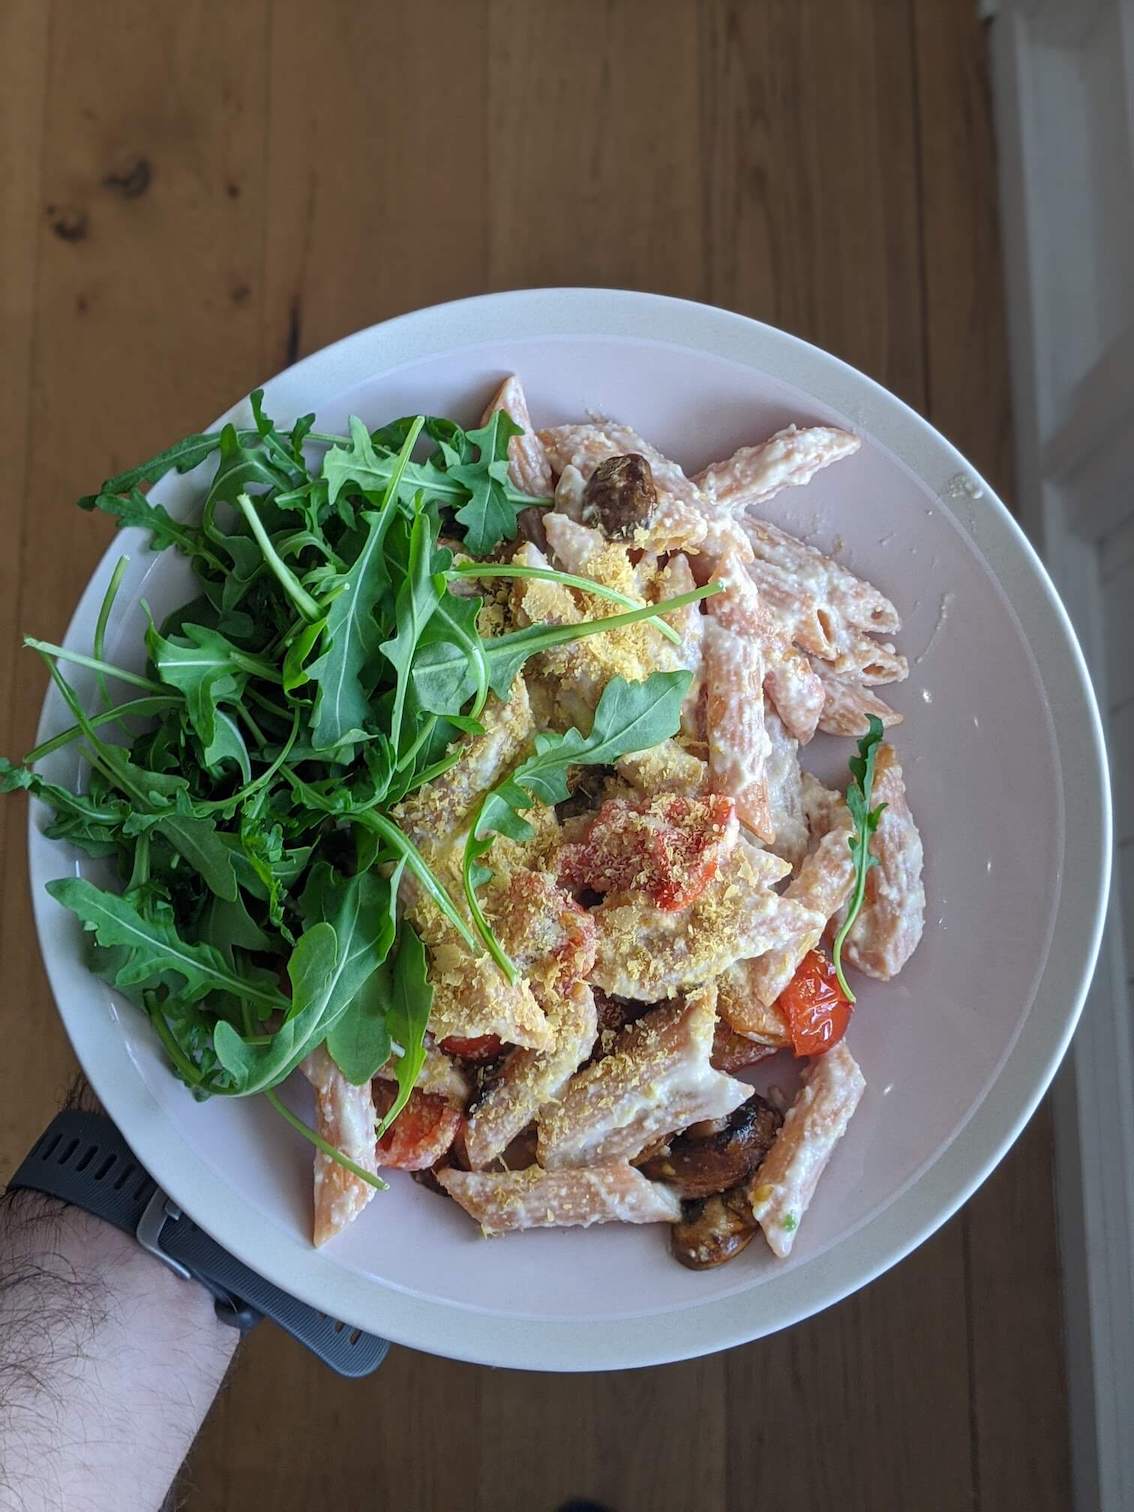 Red lentil pasta with al fredo sauce, fried mushrooms and cherry tomatoes, rocket